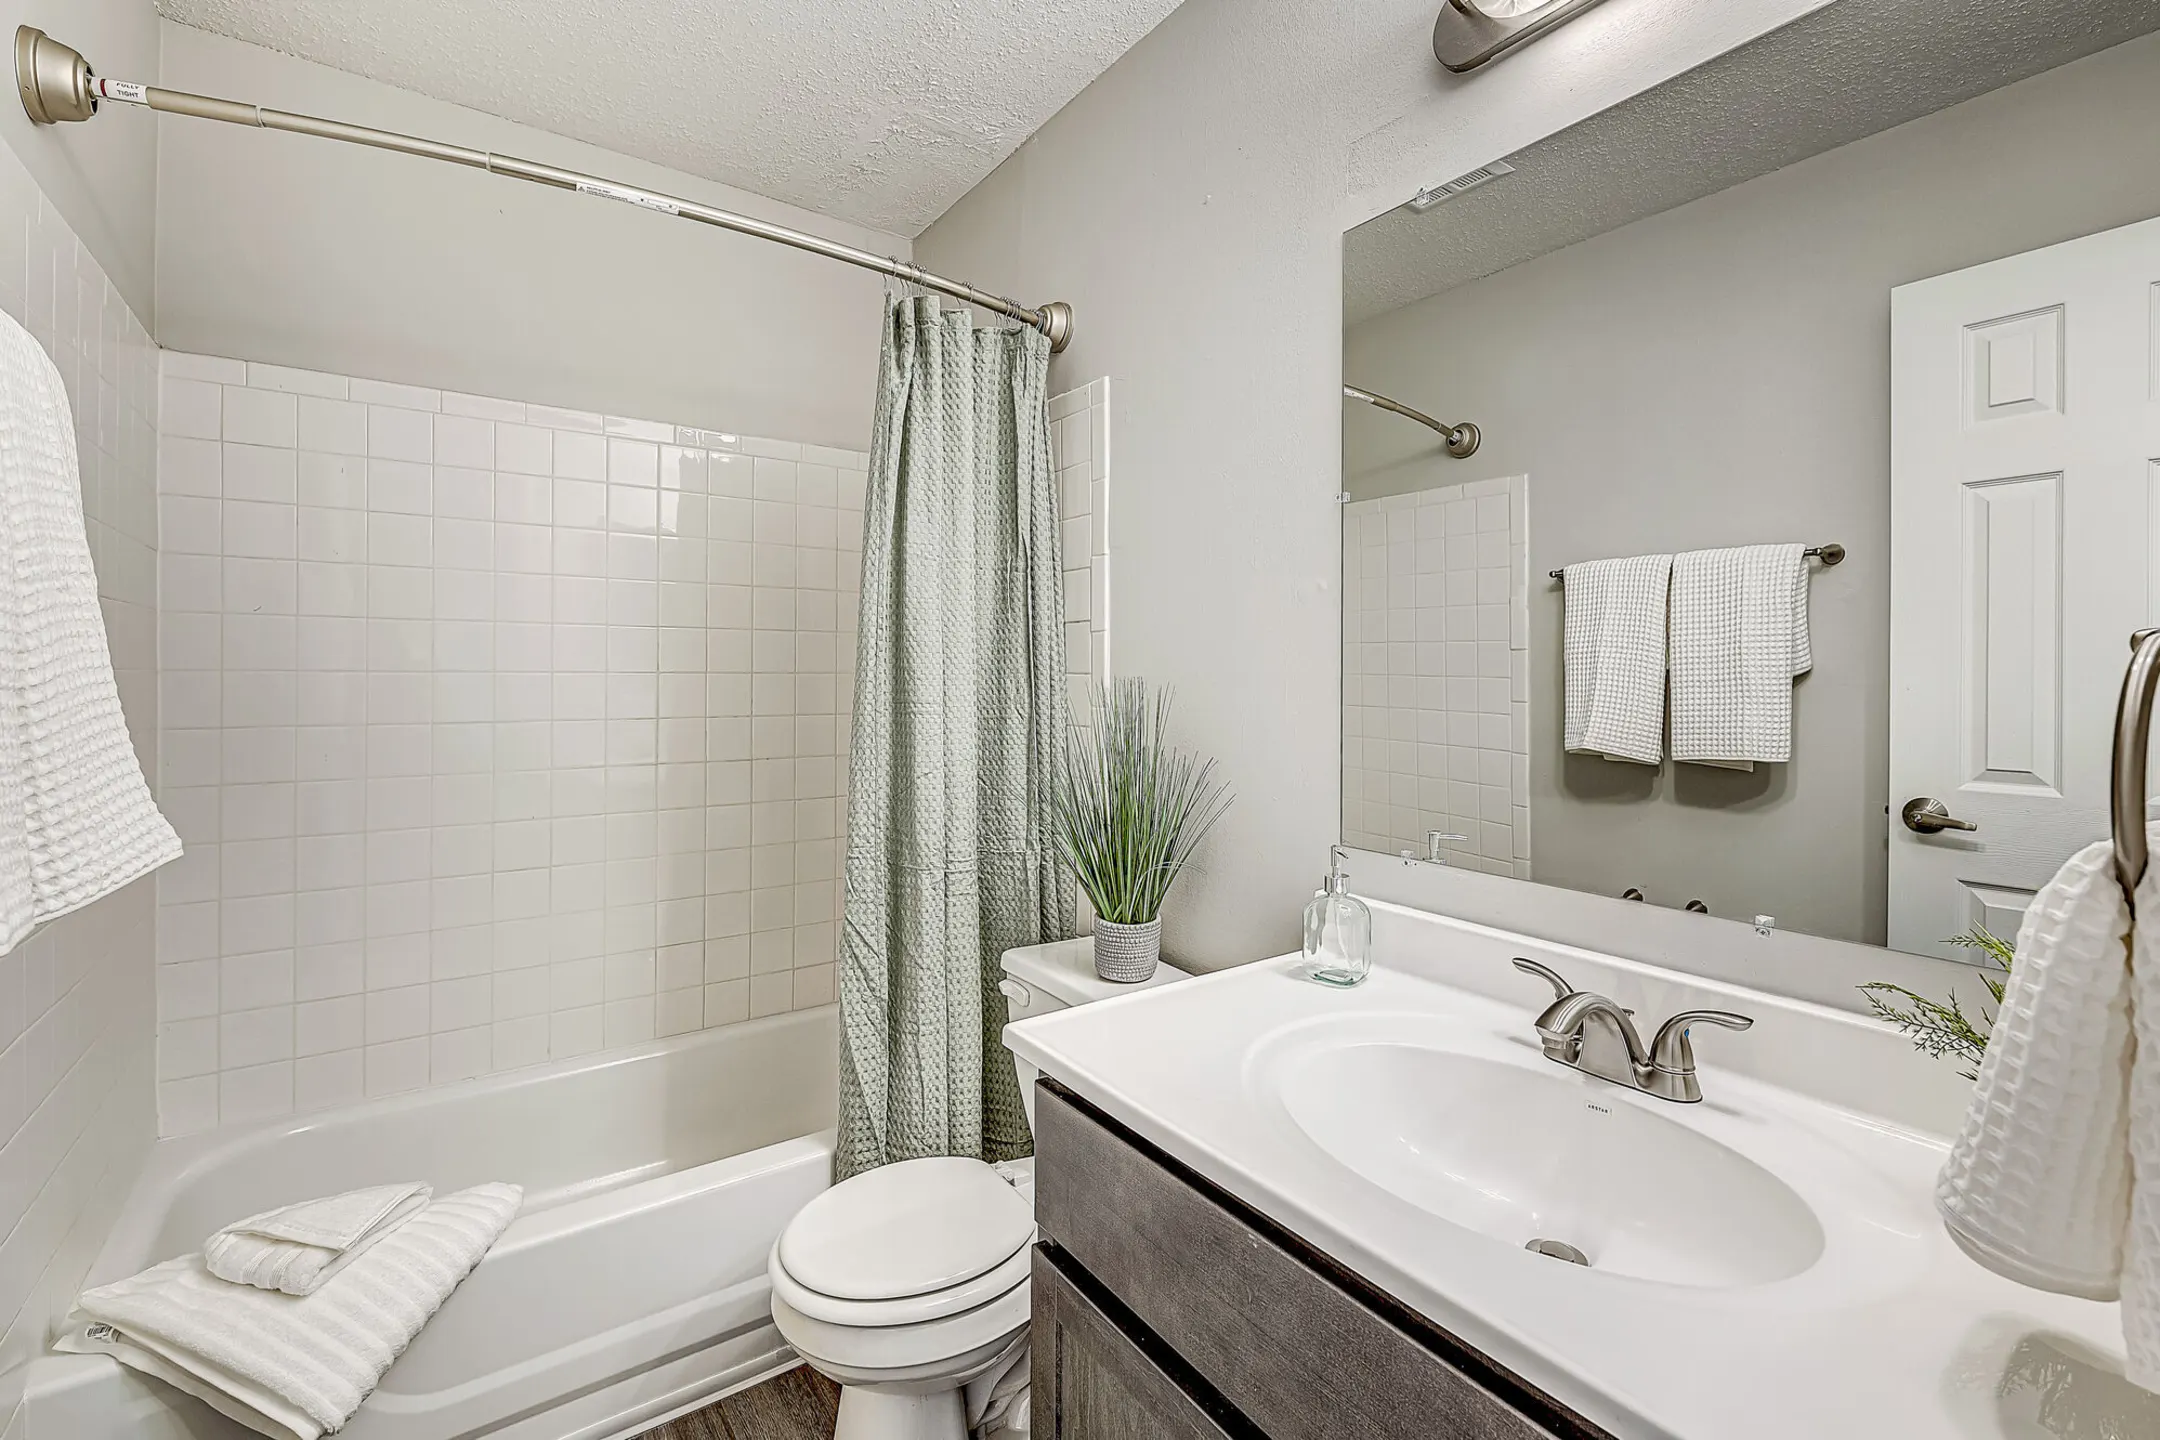 Bathroom - Ninth Ave Apartments - Indianapolis, IN